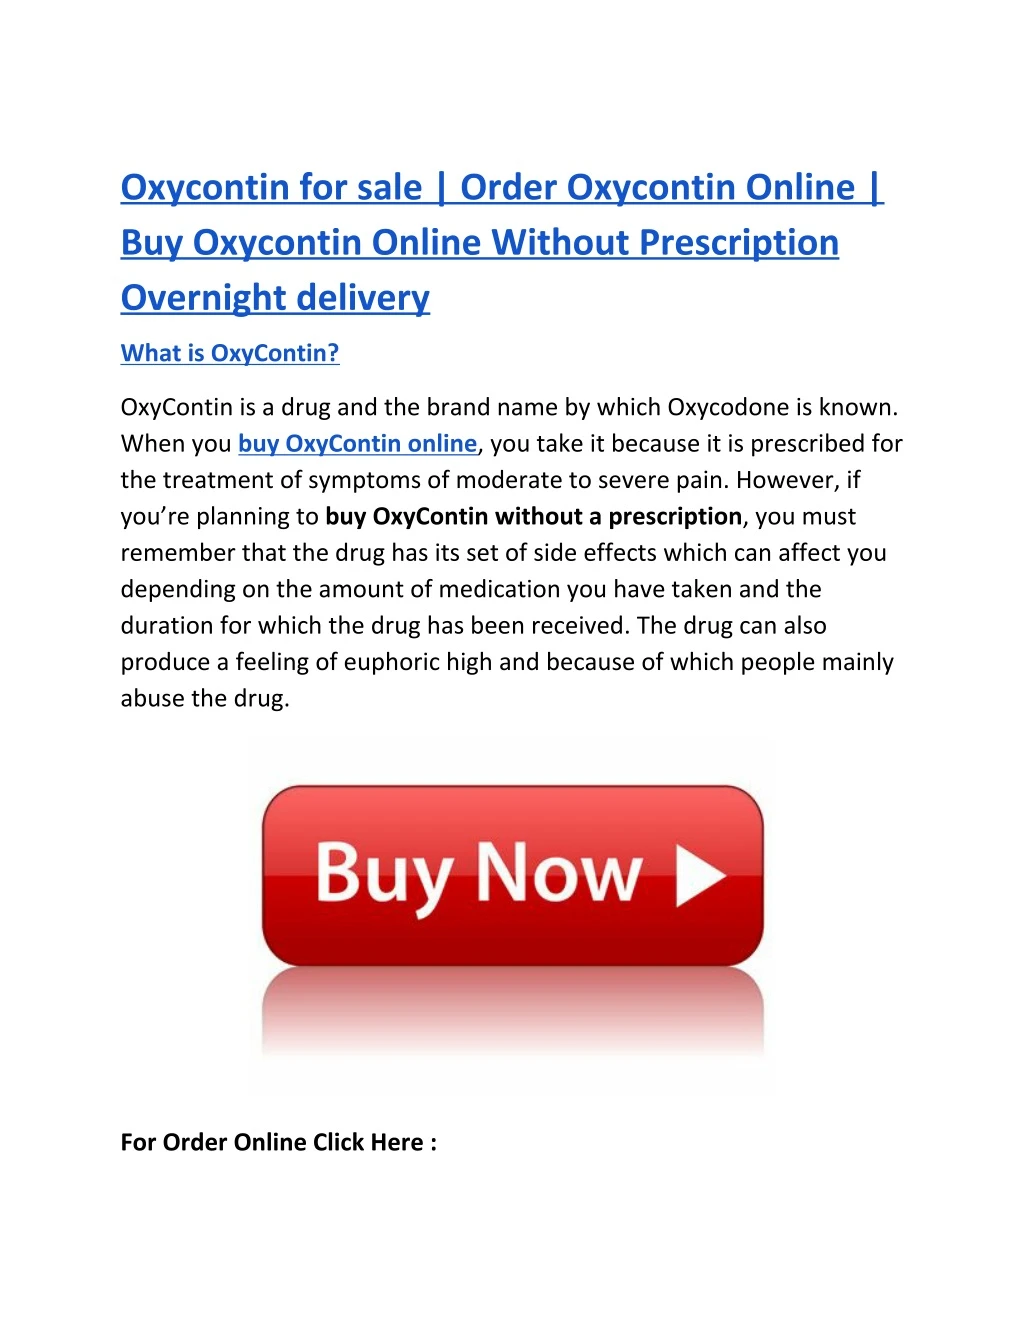 oxycontin for sale order oxycontin online